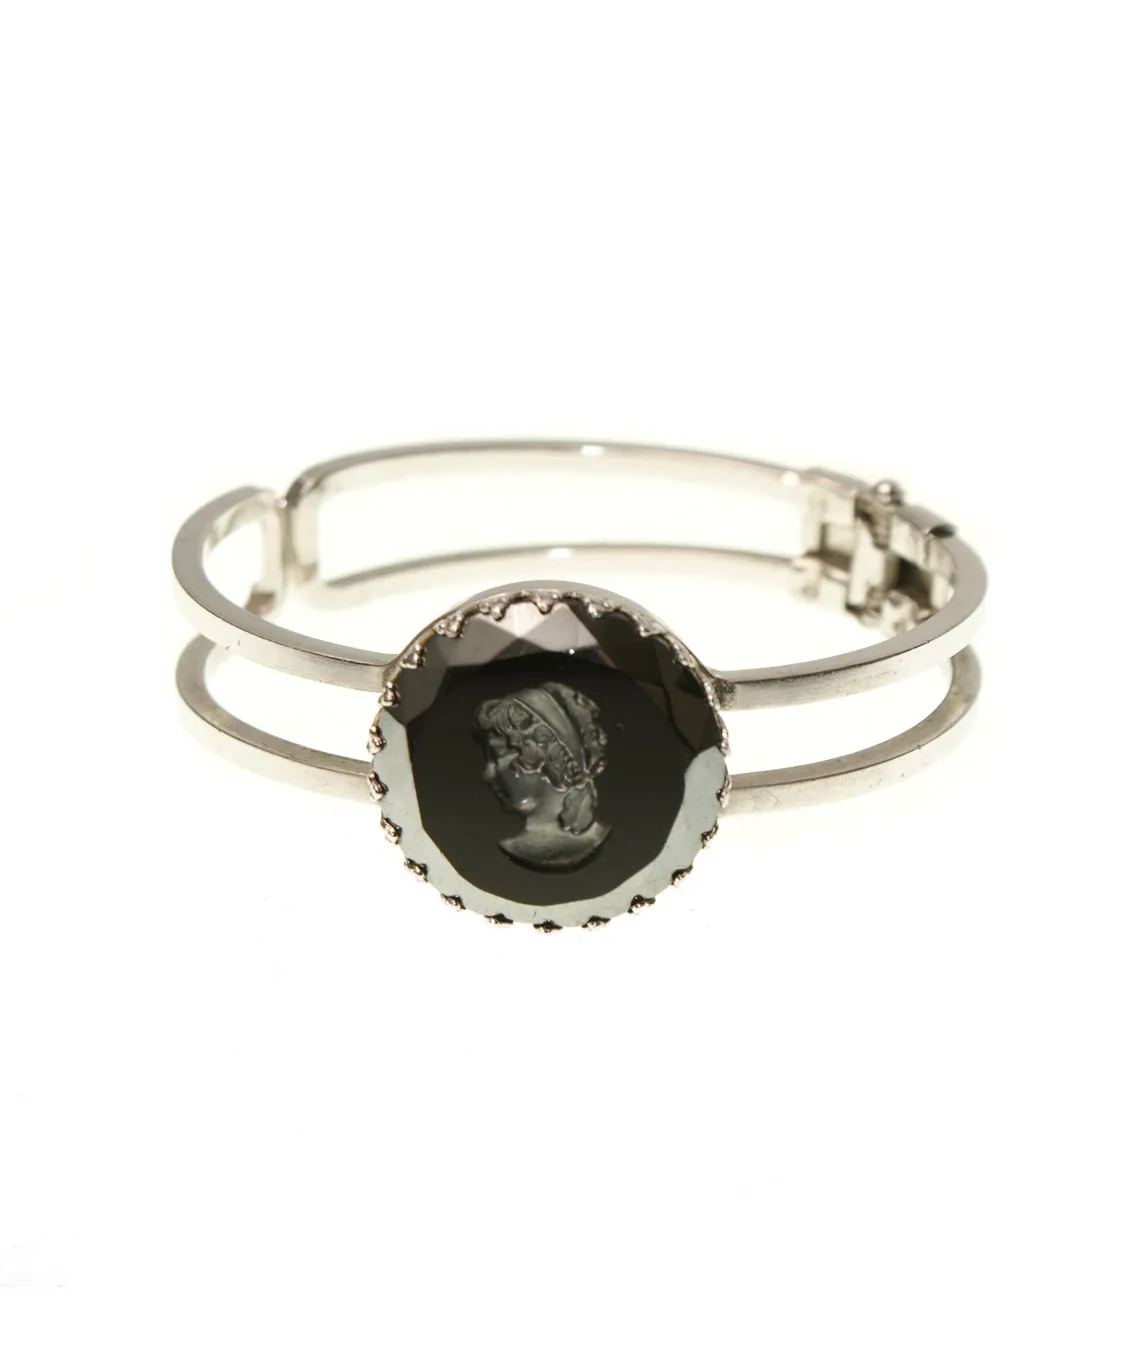 Silver hinged bangle with a black cameo